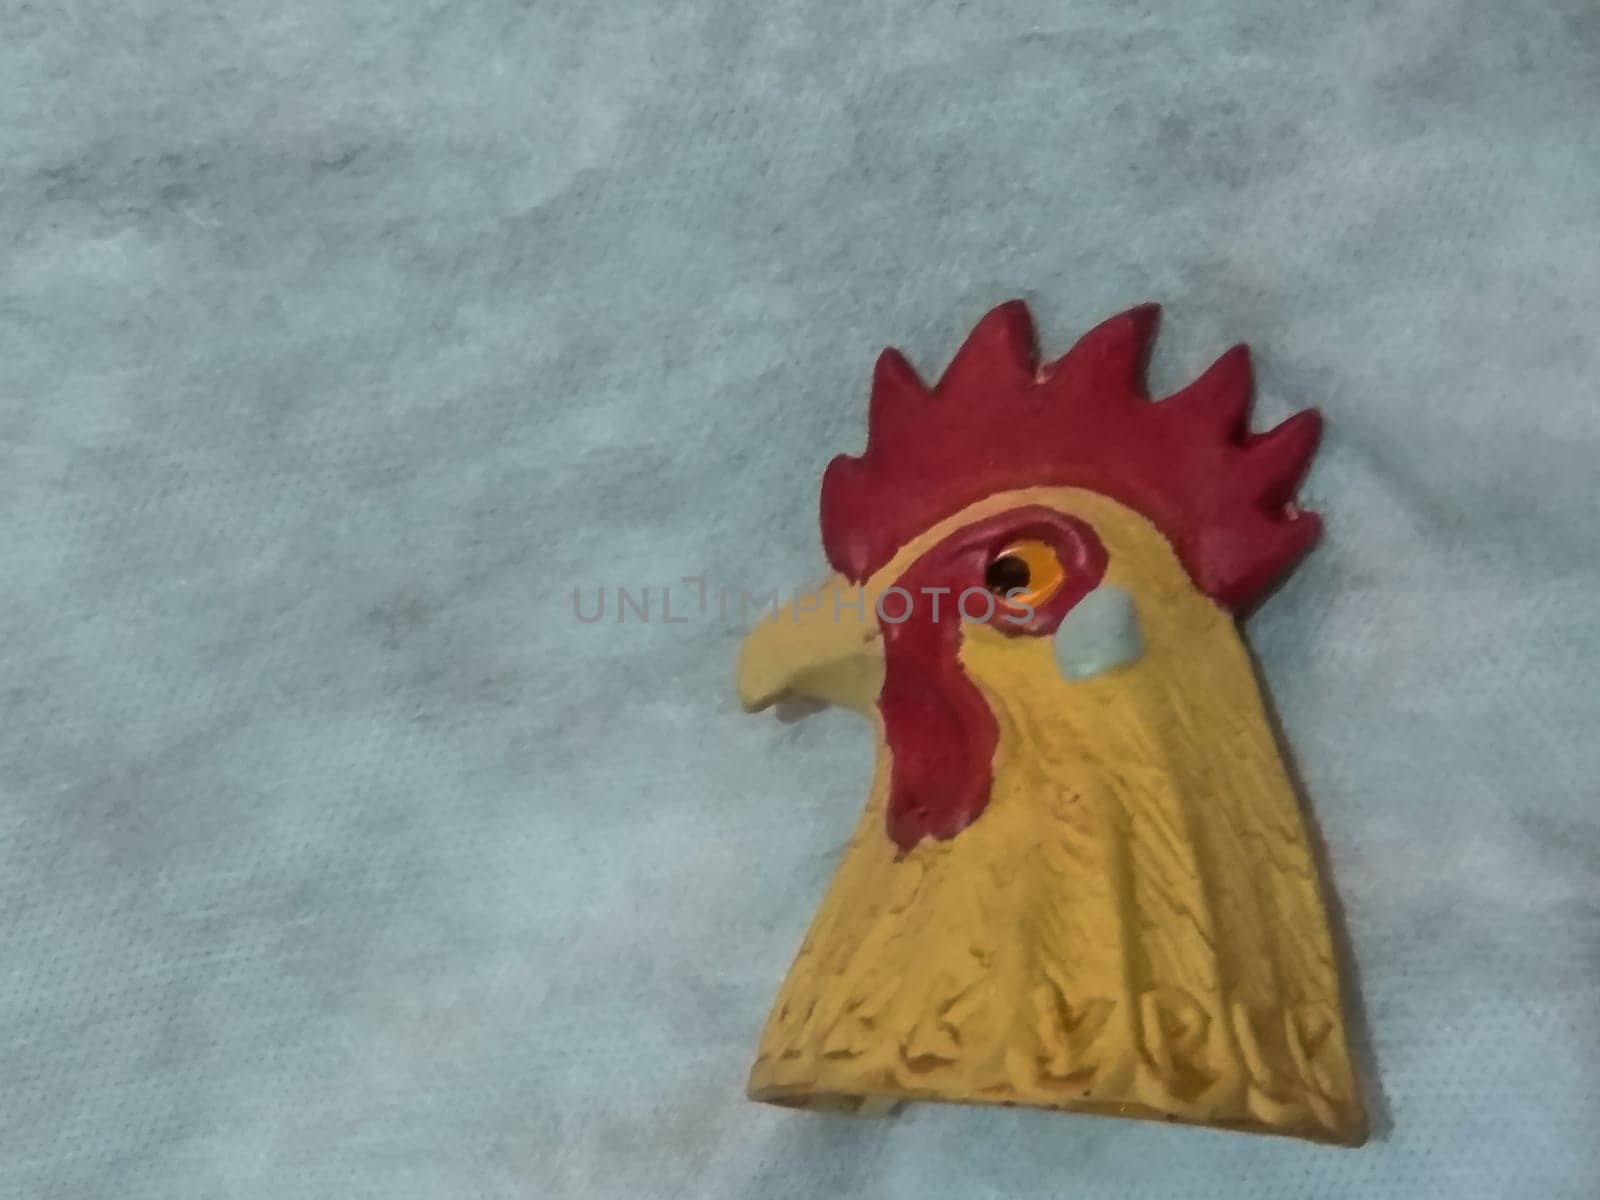 ceramic figurine of a rooster head on a gray background, handmade bell. High quality photo